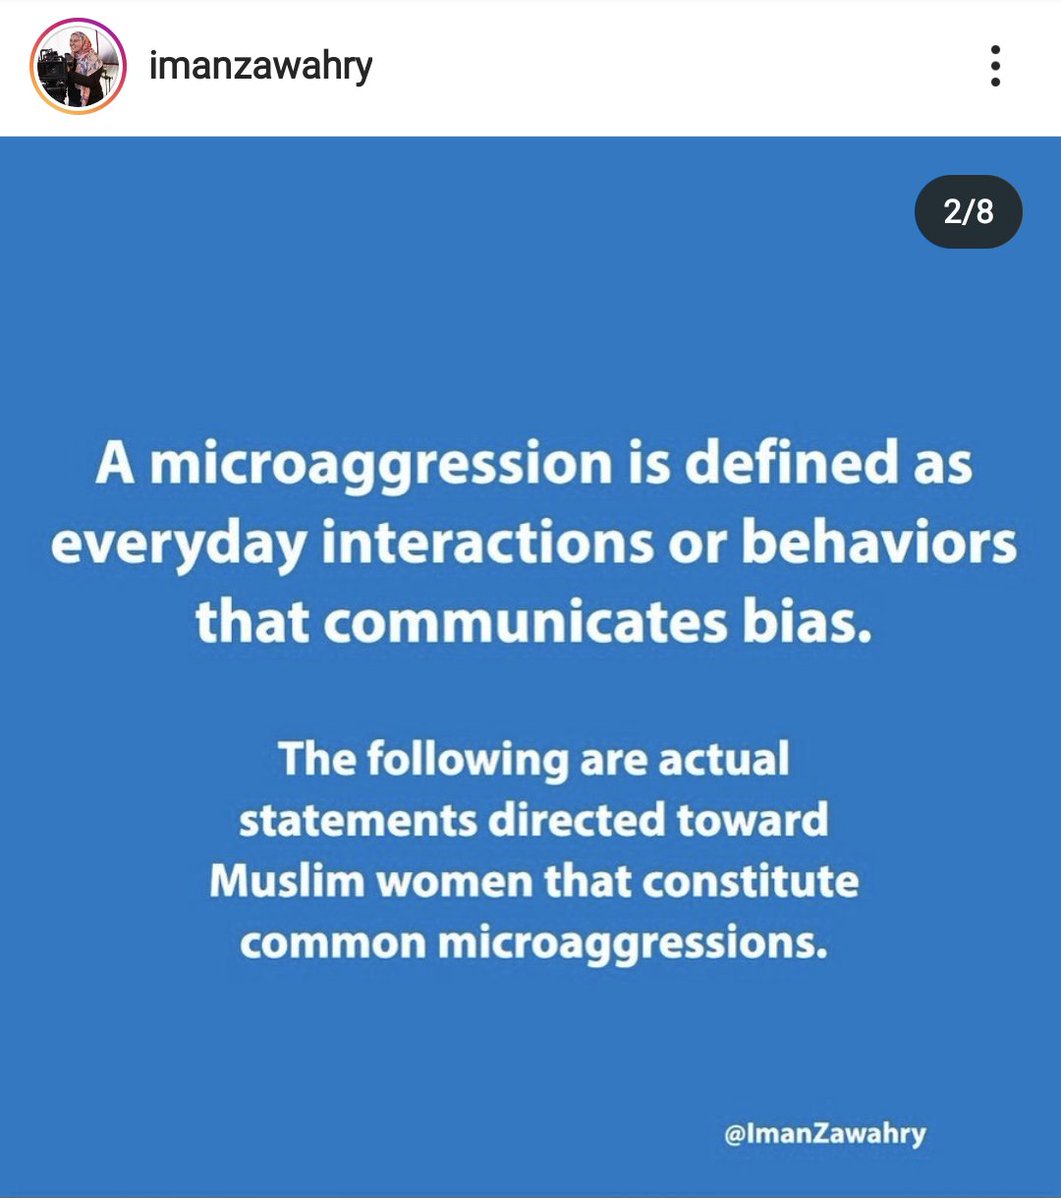 Thank YOU to the brilliant  @imankzfilm for this Instagram post on "Microaggressions towards Muslim women" I sadly relate to so many of these statements. Thread with my commentary.